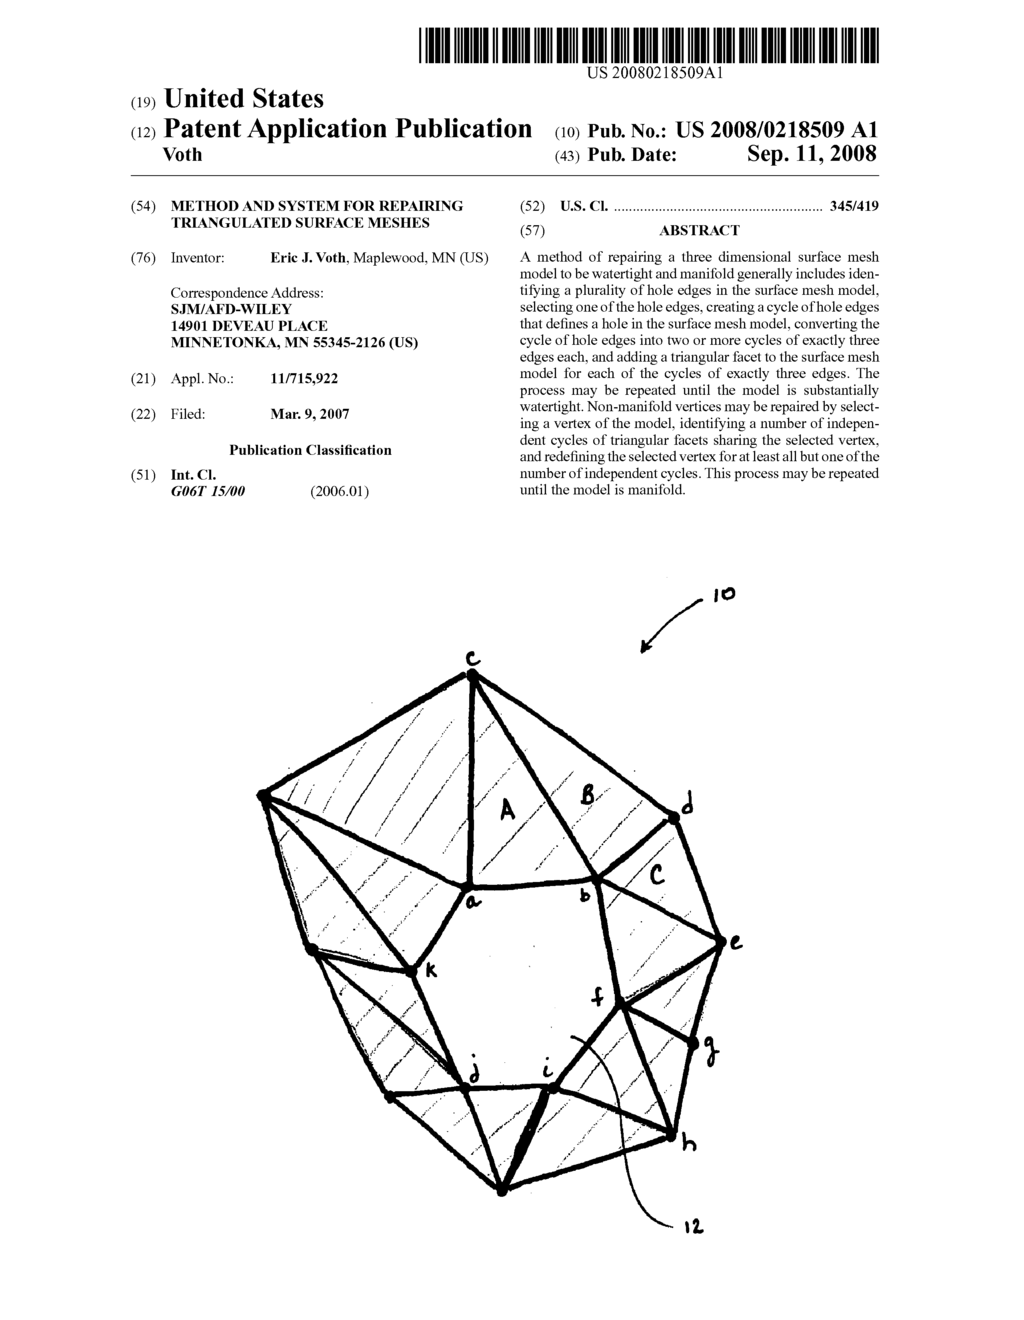 Method and system for repairing triangulated surface meshes - diagram, schematic, and image 01